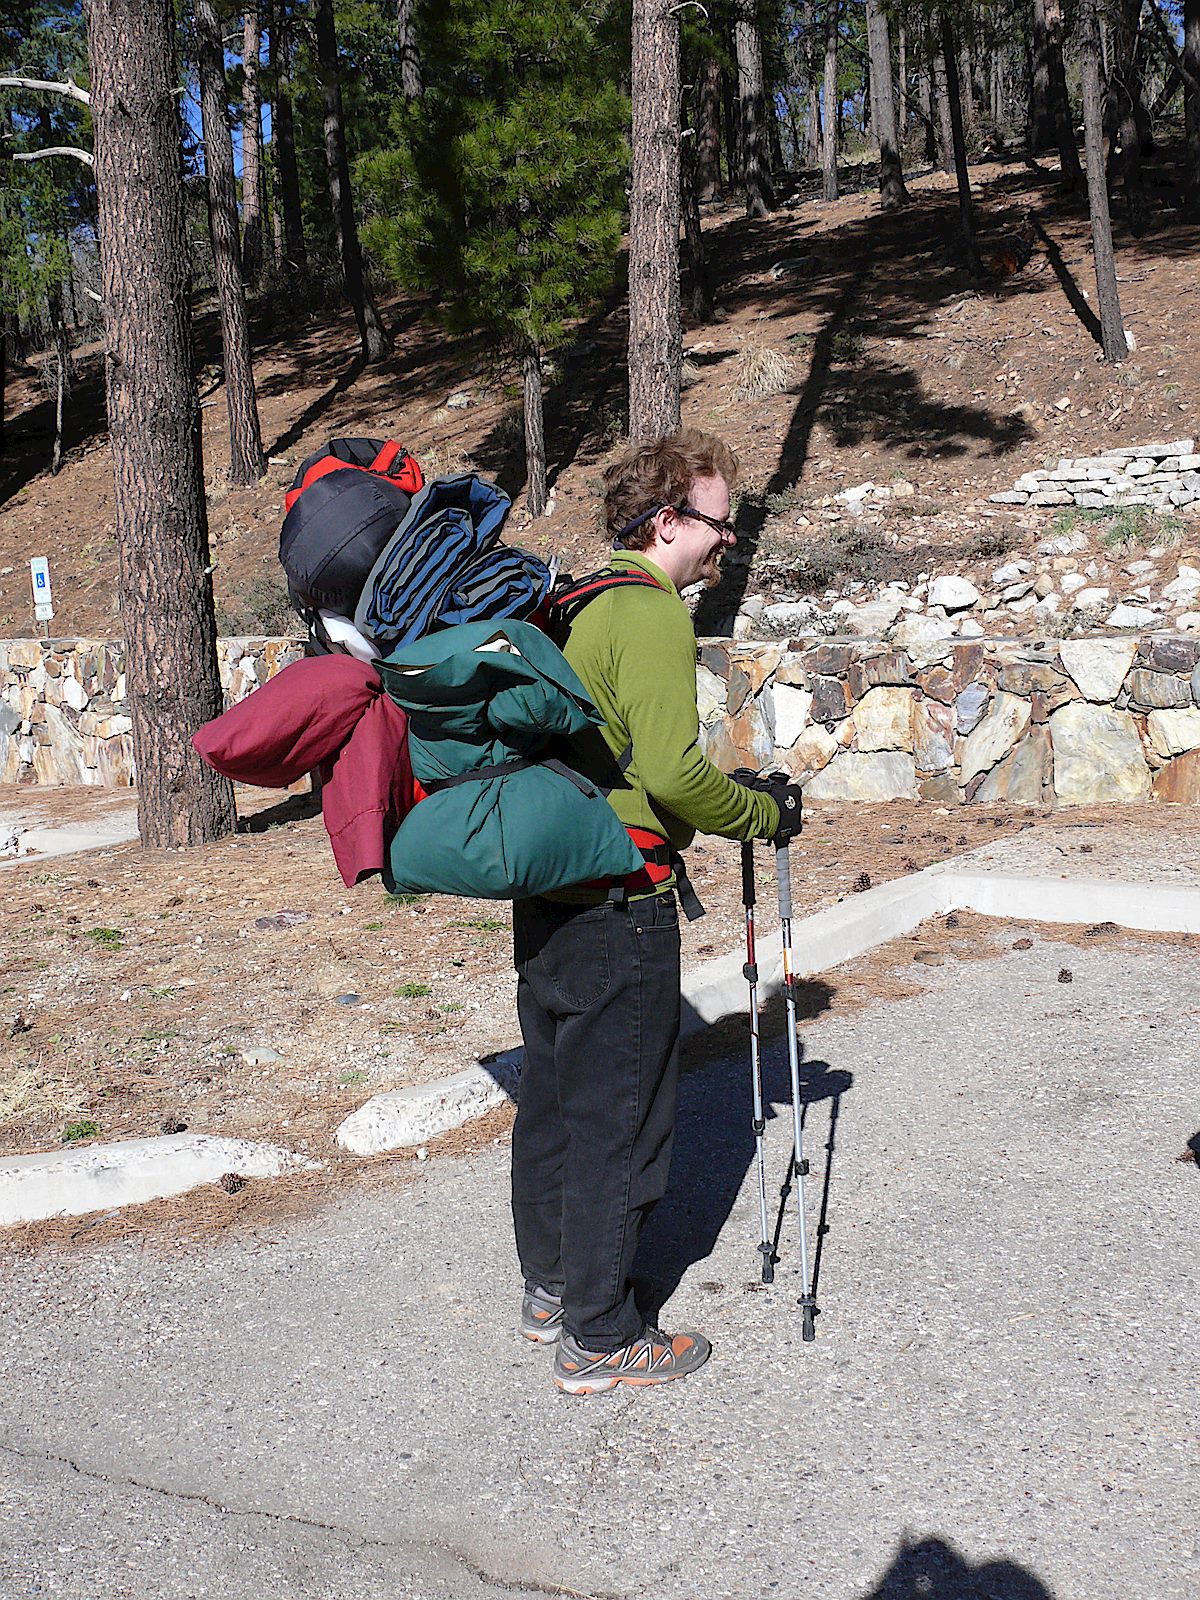 The closest you are going to get to camping at the Box Camp Trailhead is loading up your gear and hiking in! March 2008.